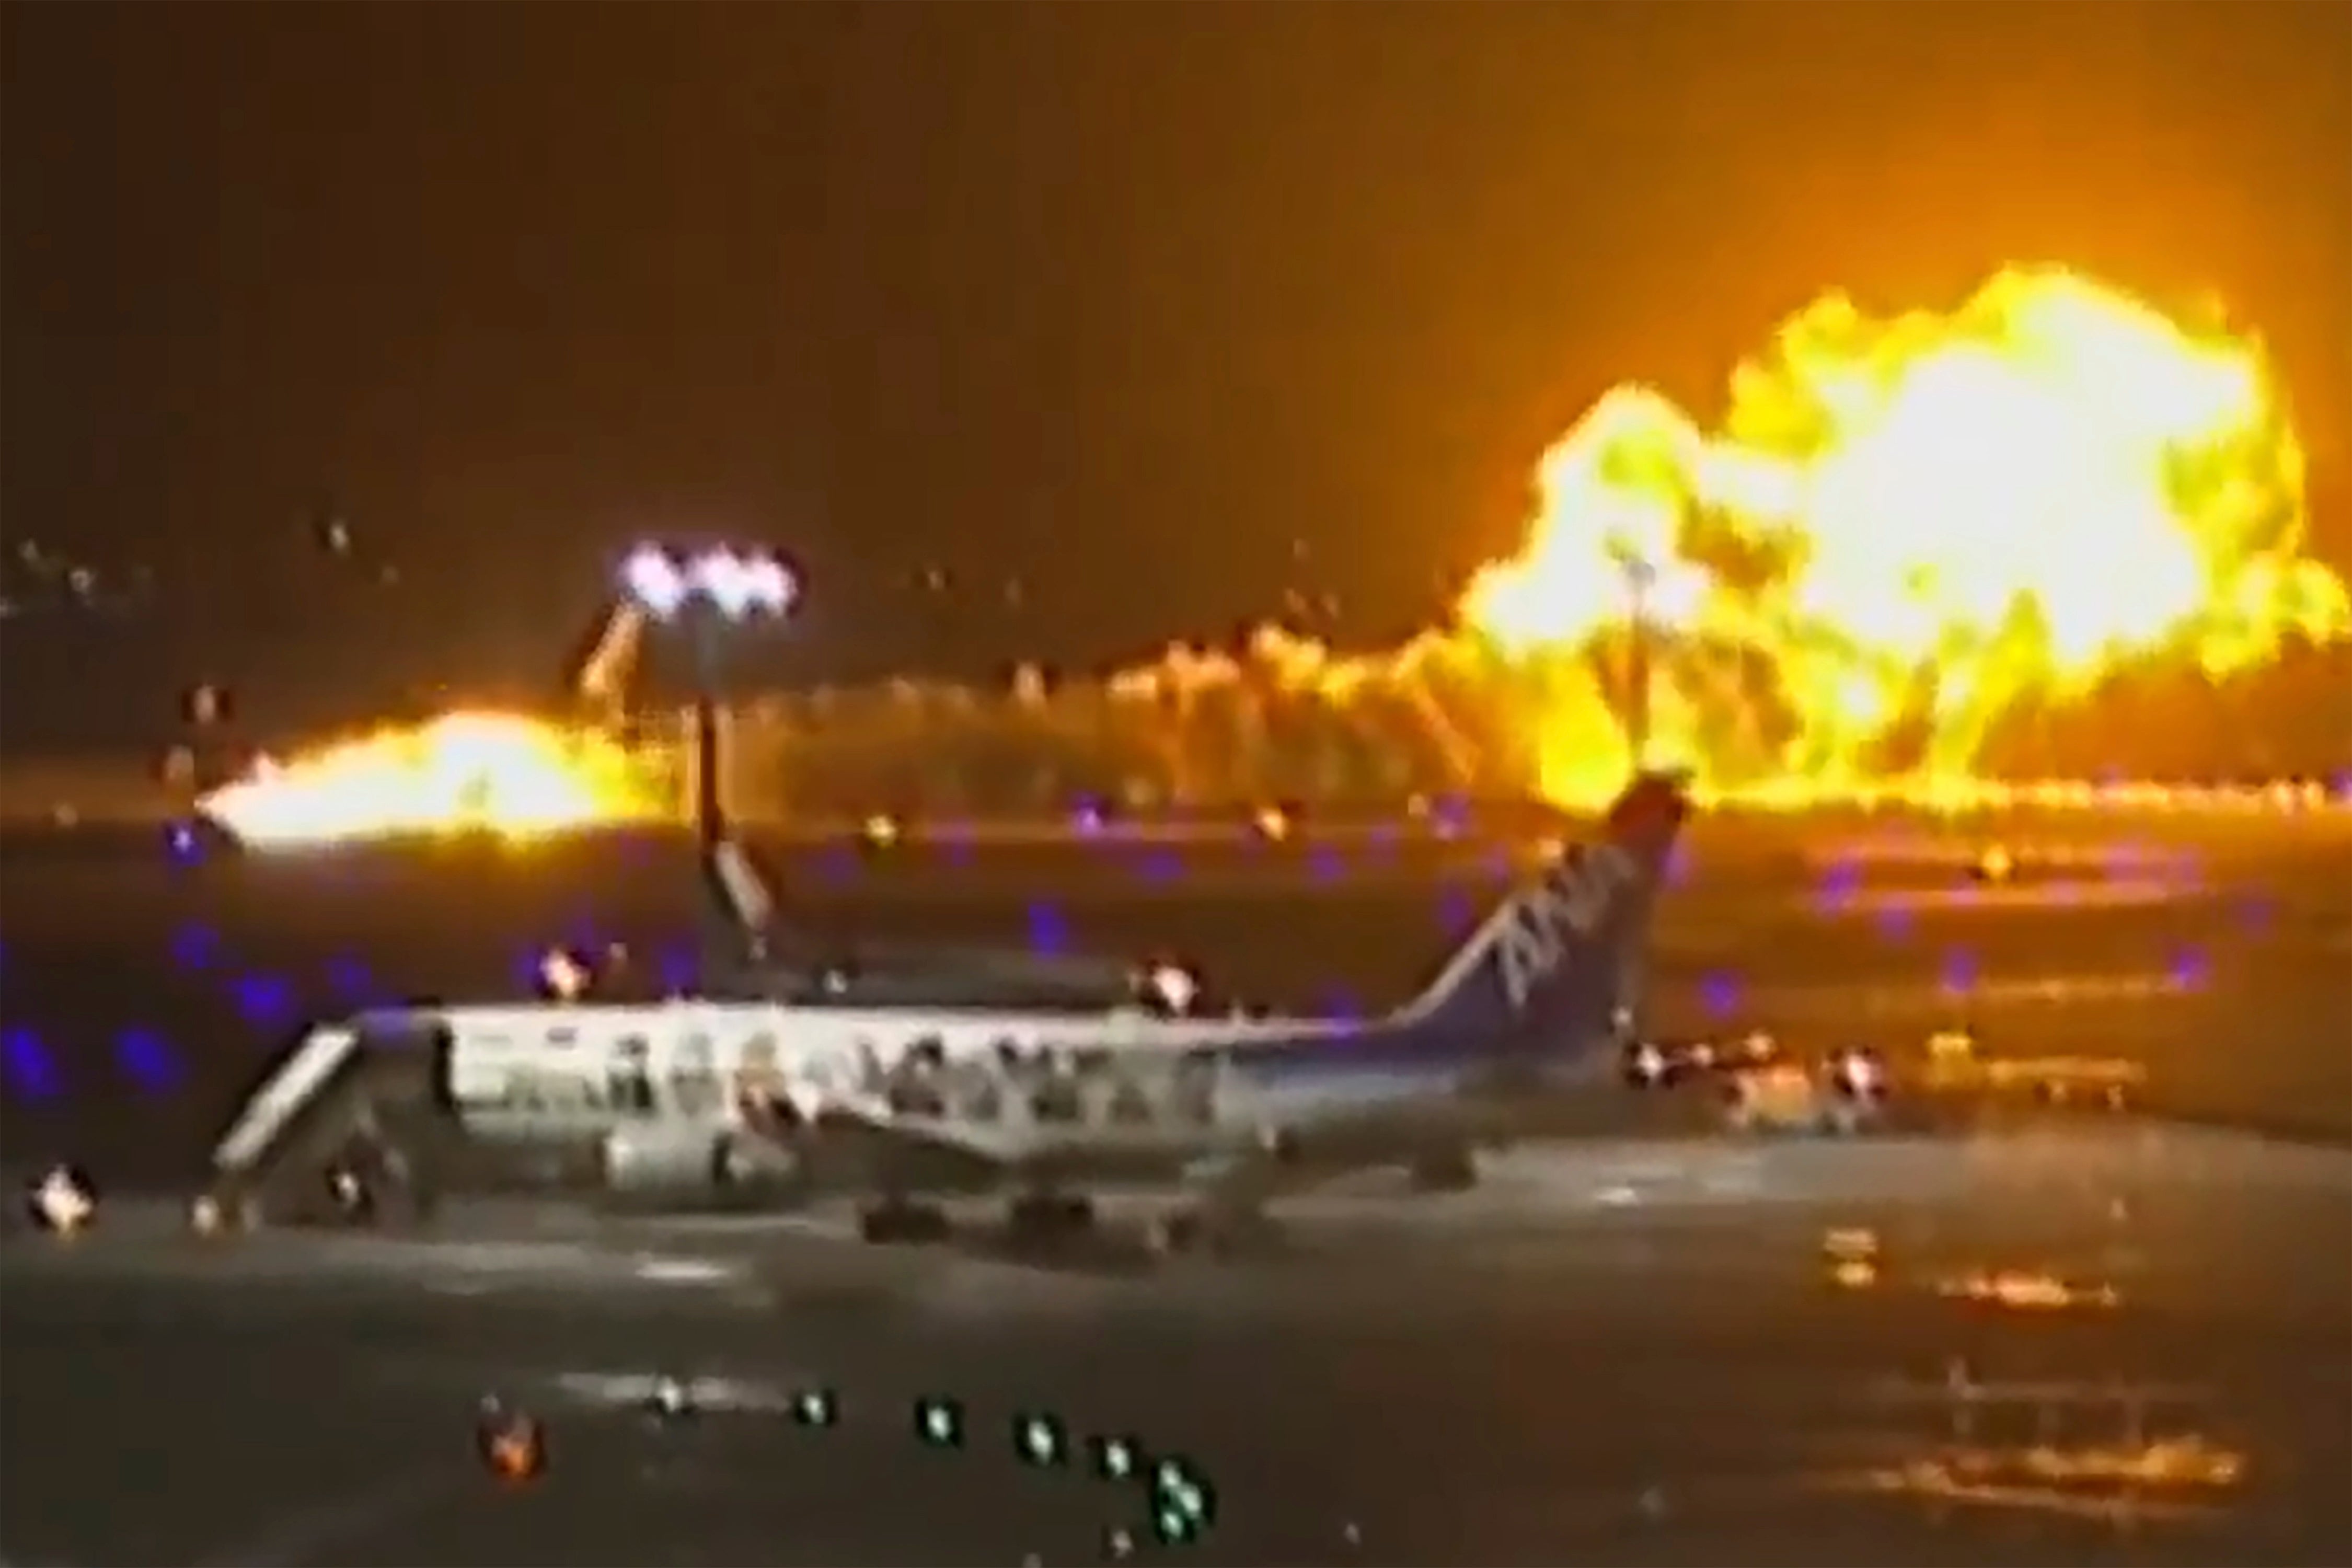 Footage appeared to show the moment the plane caught fire